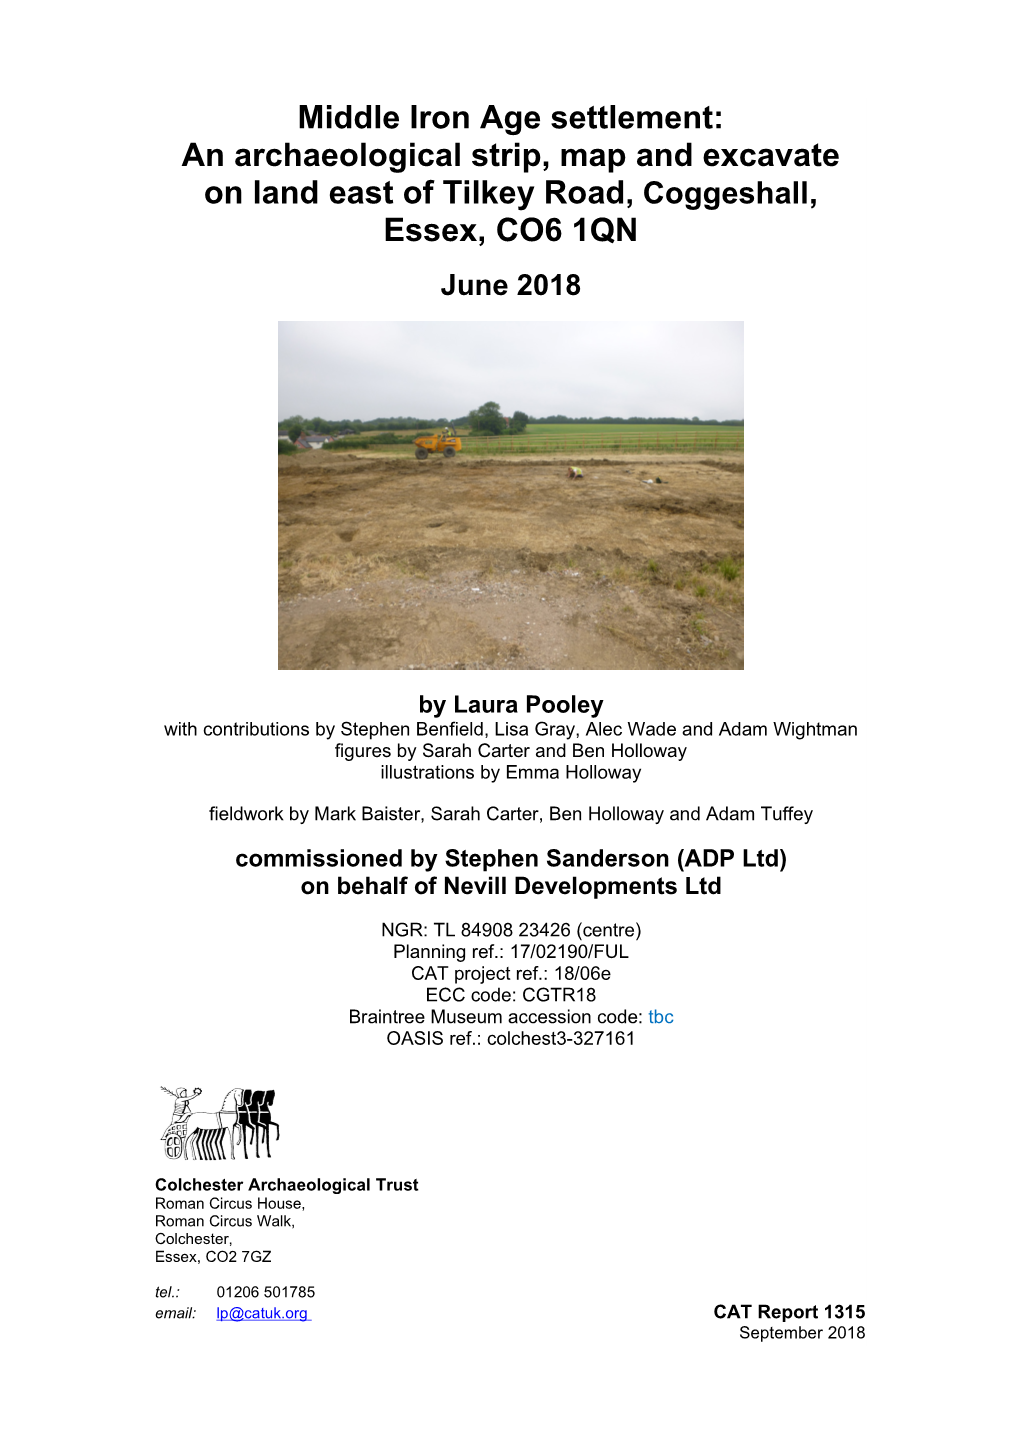 Middle Iron Age Settlement: an Archaeological Strip, Map and Excavate on Land East of Tilkey Road, Coggeshall, Essex, CO6 1QN June 2018